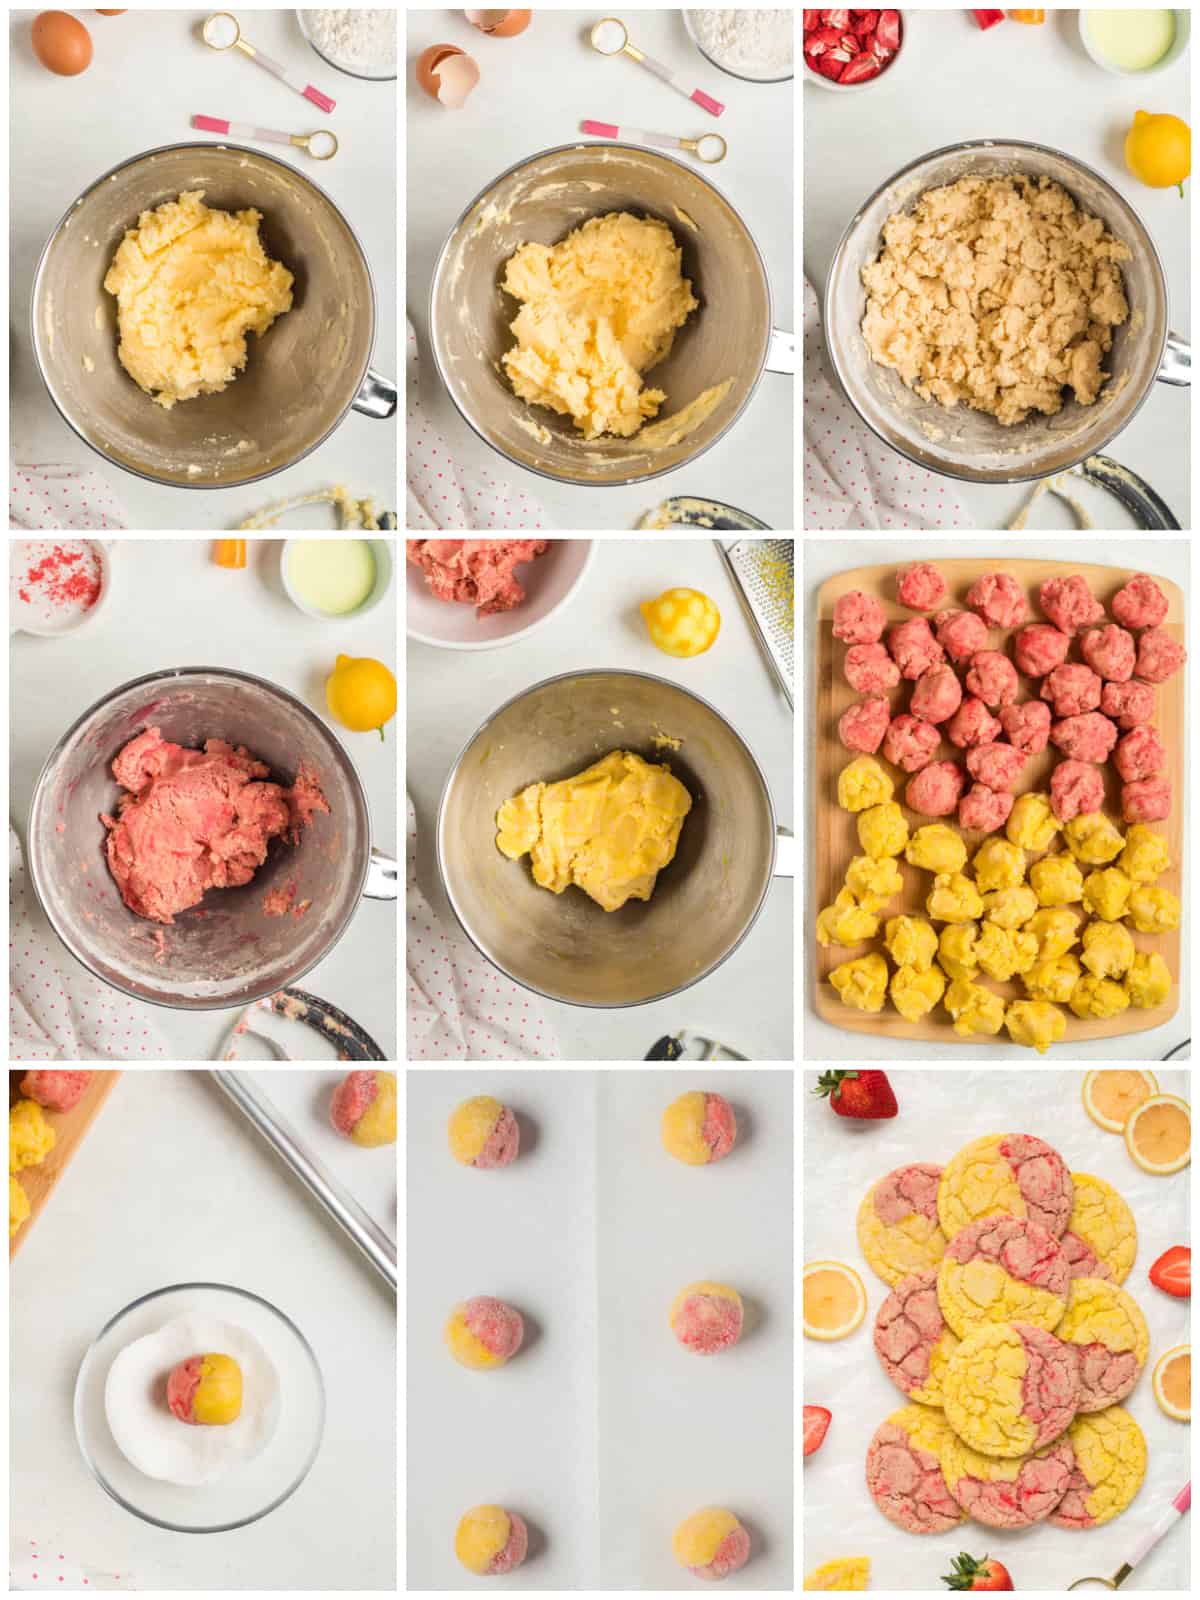 Step by step photos on how to make Strawberry Lemonade Cookies.